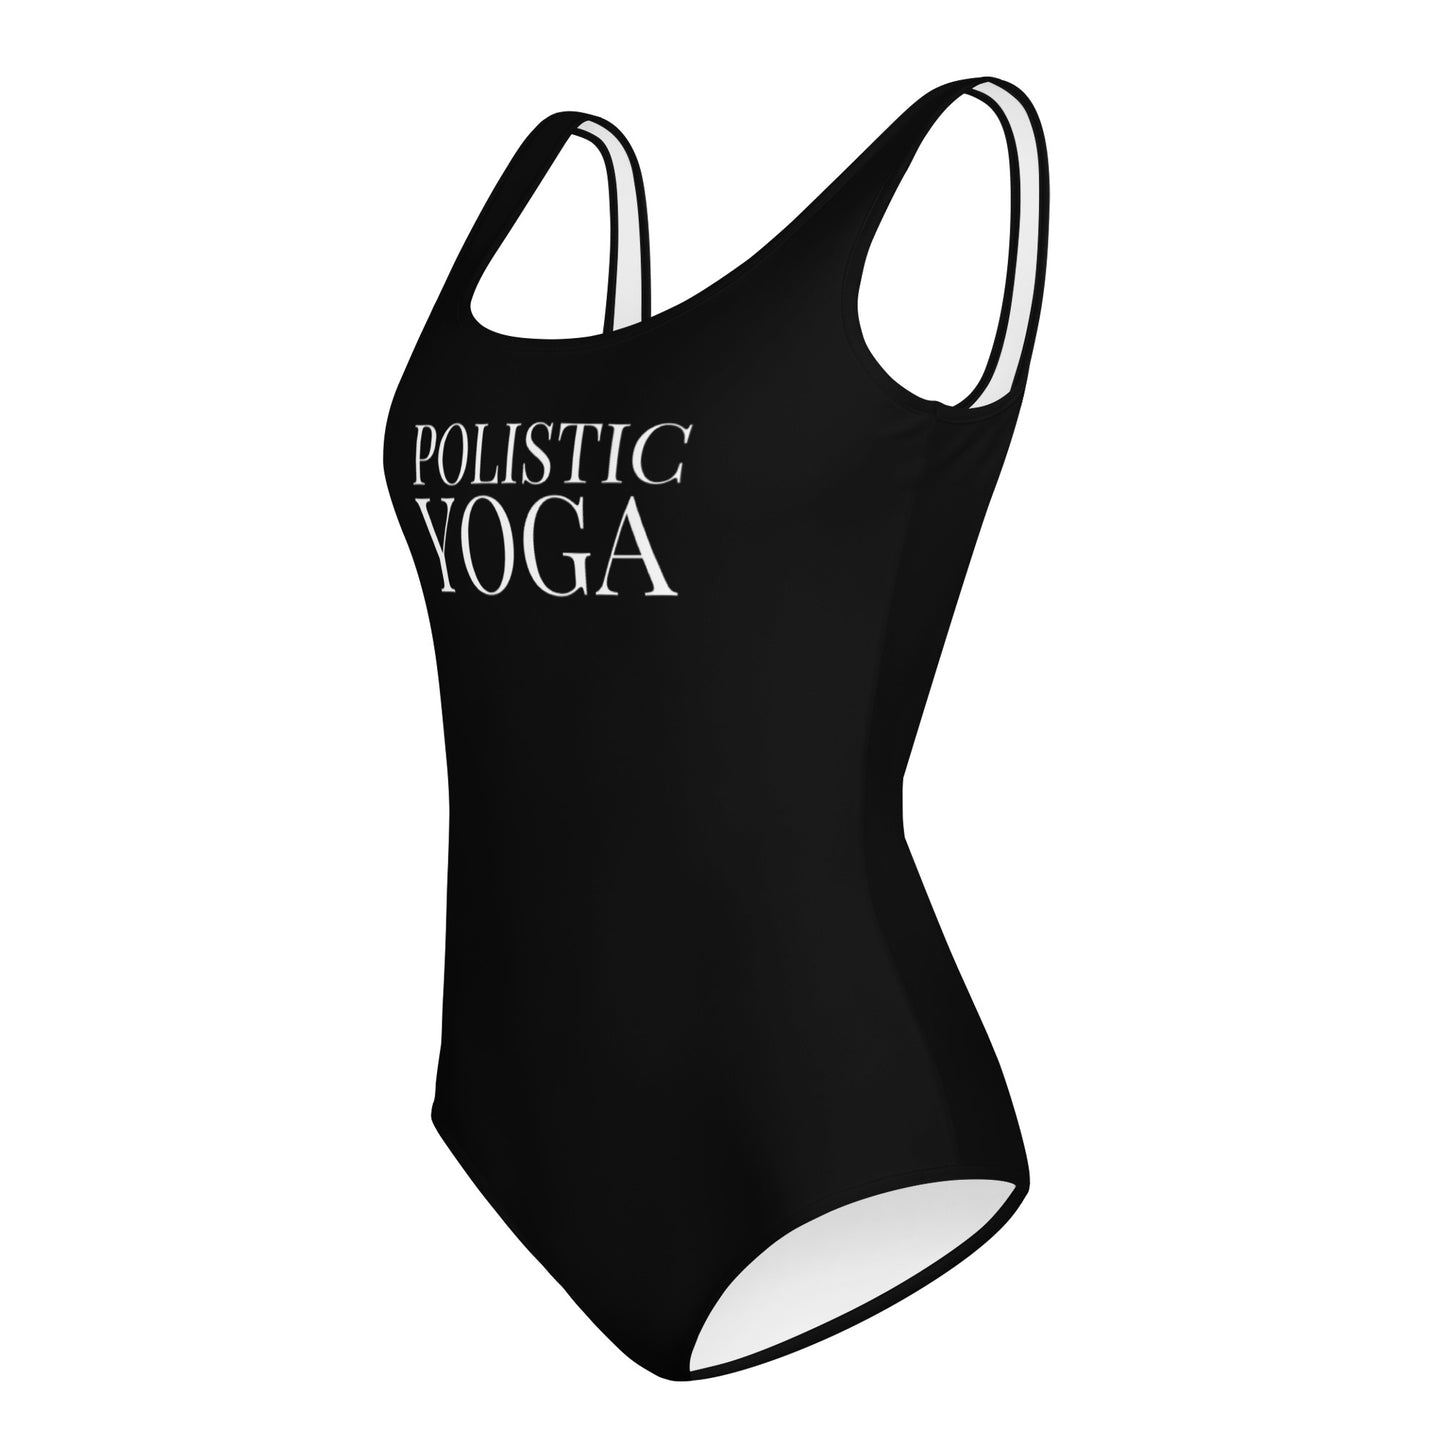 One-Piece Polistic Yoga Youth Swimsuit